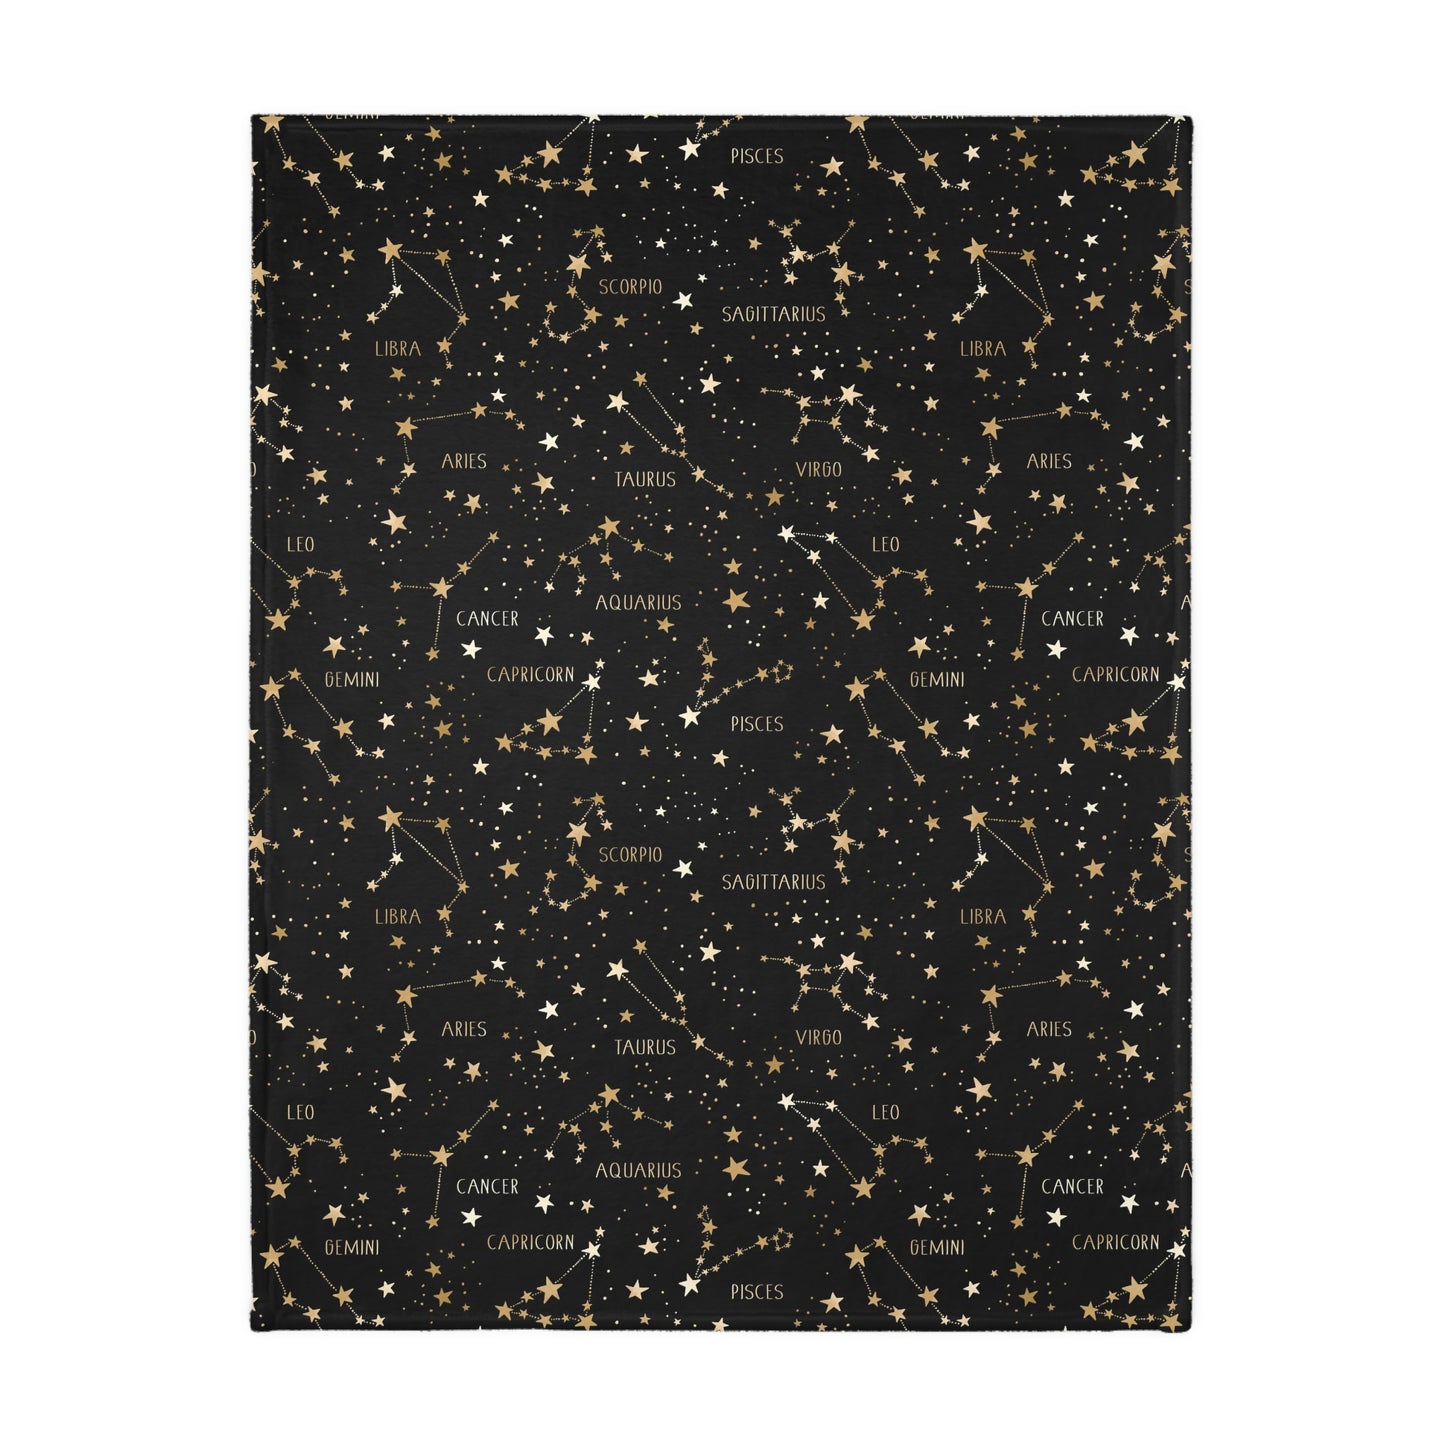 Stars and Zodiac Signs Velveteen Minky Blanket (Two-sided print)